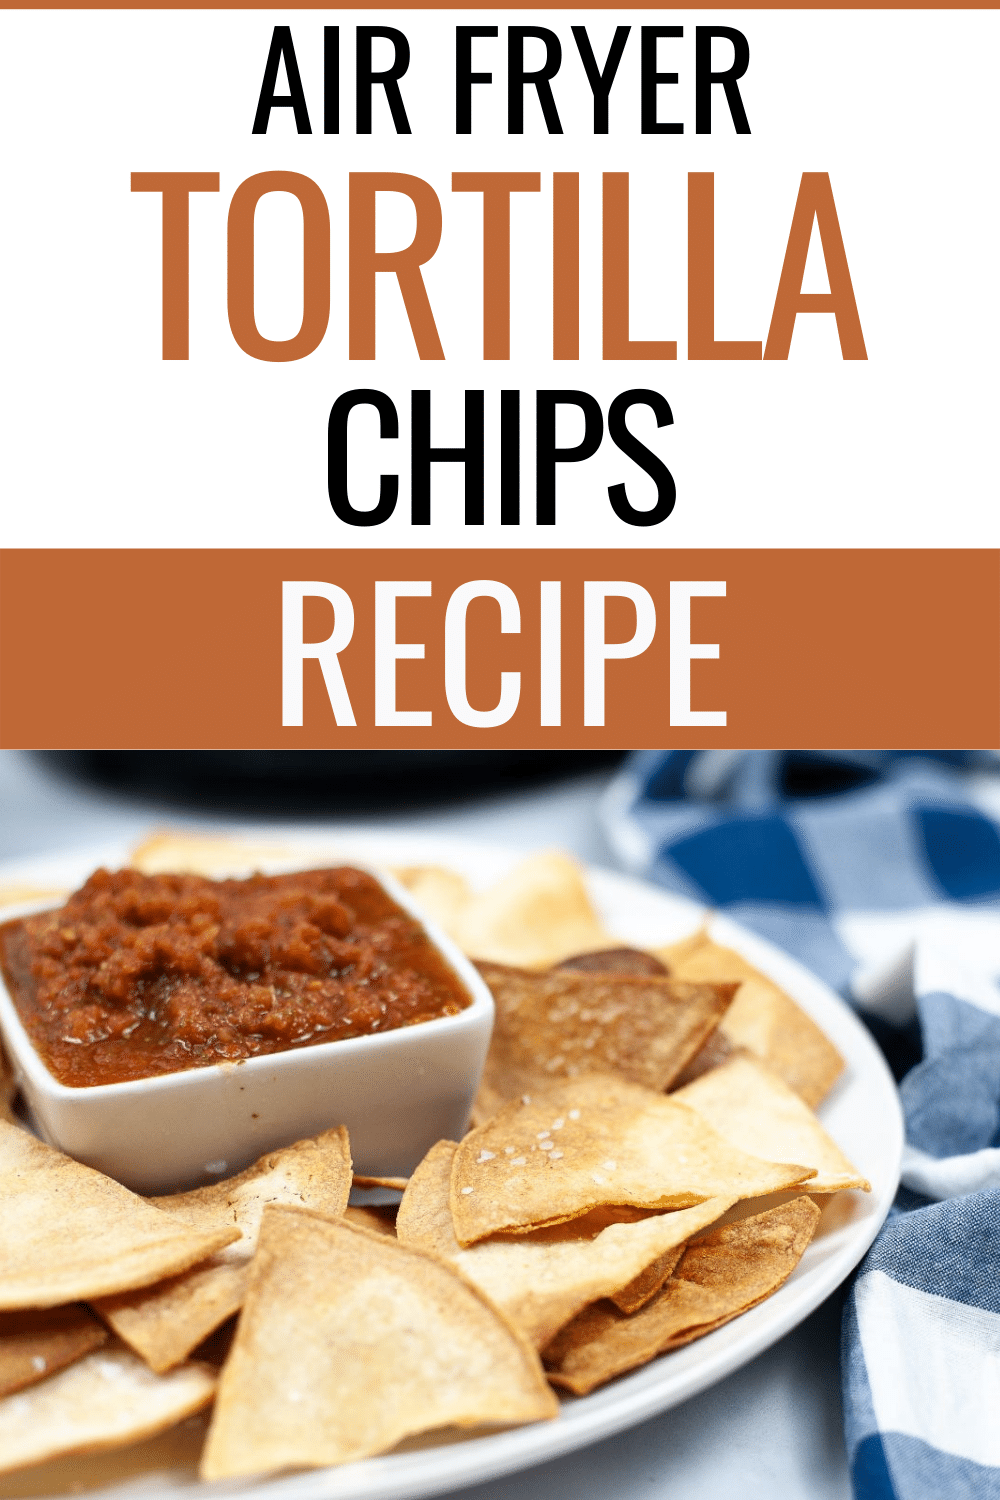 Air Fryer Tortilla Chips at the bottom of the image and at the upper part, a text saying "Air Fryer Tortilla Chips Recipe"